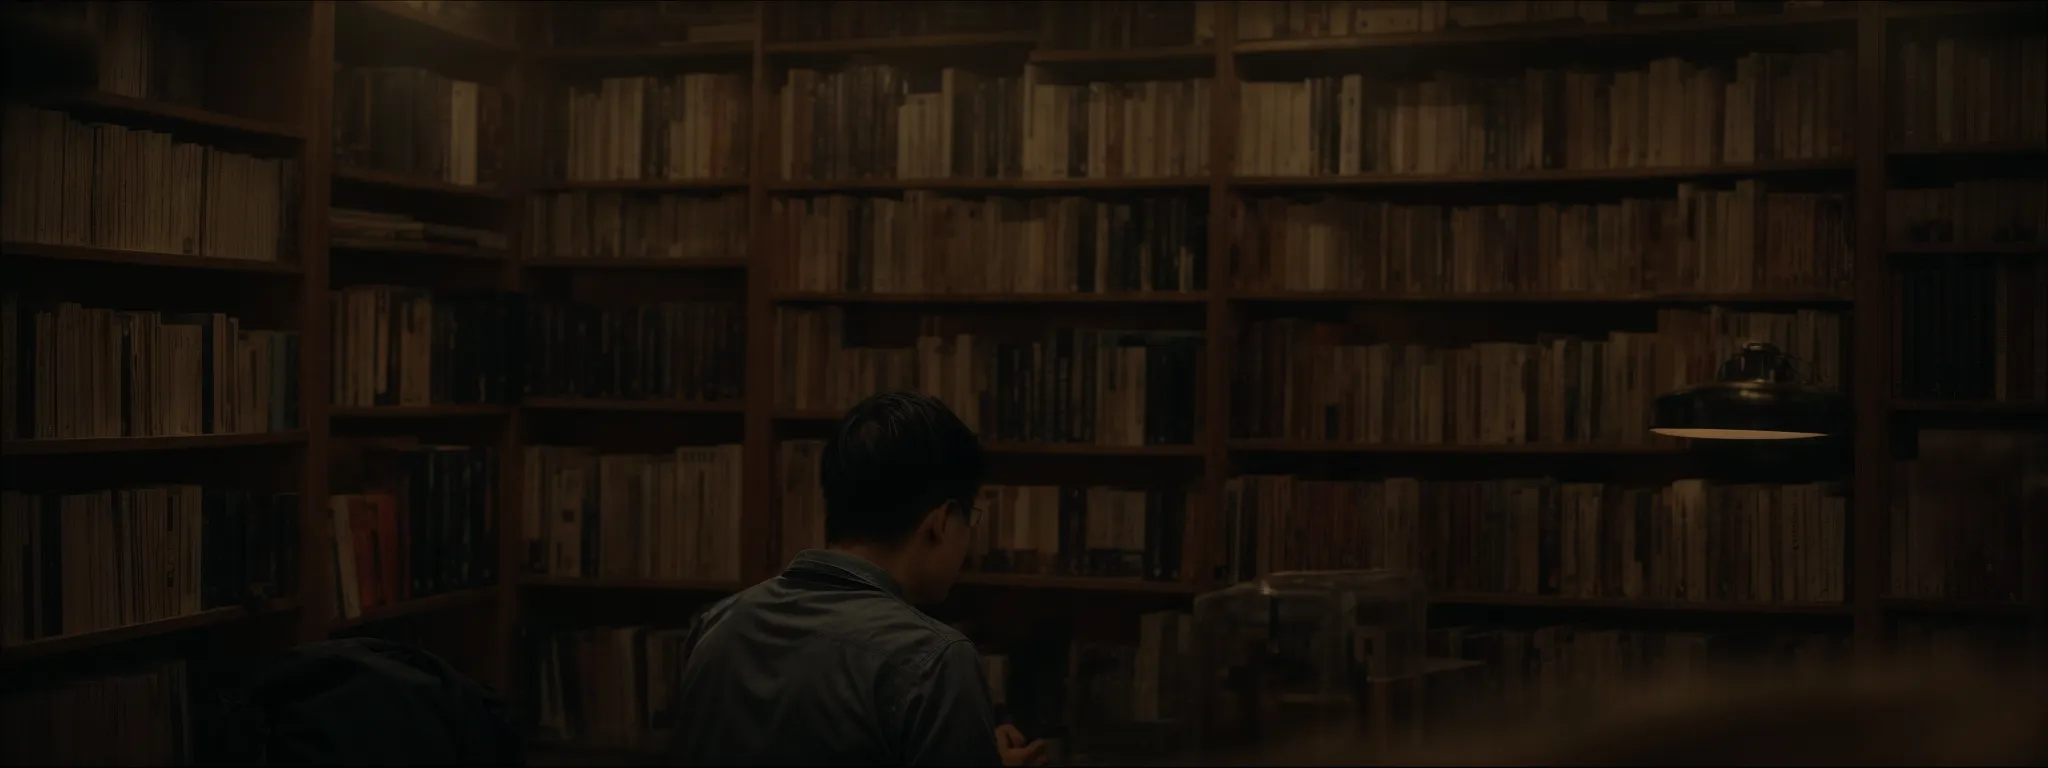 a person intently browsing through a neatly organized bookshelf in a well-lit, modern library.